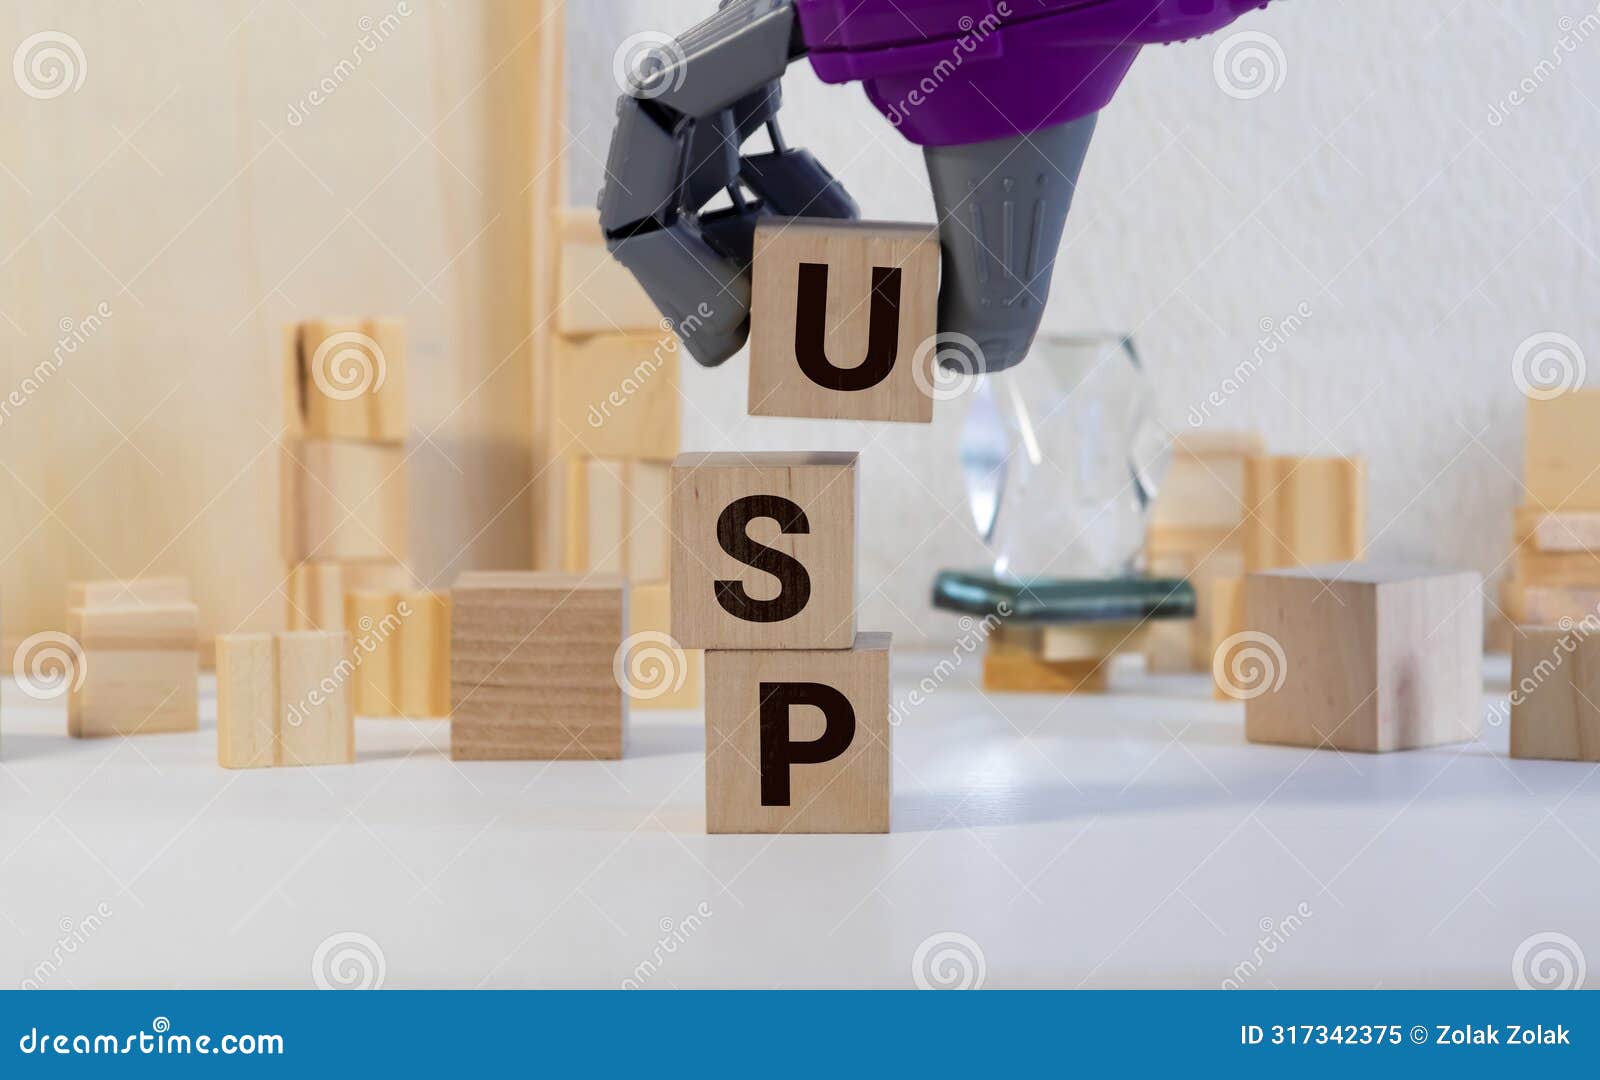 wooden blocks on a gray background with the text usp